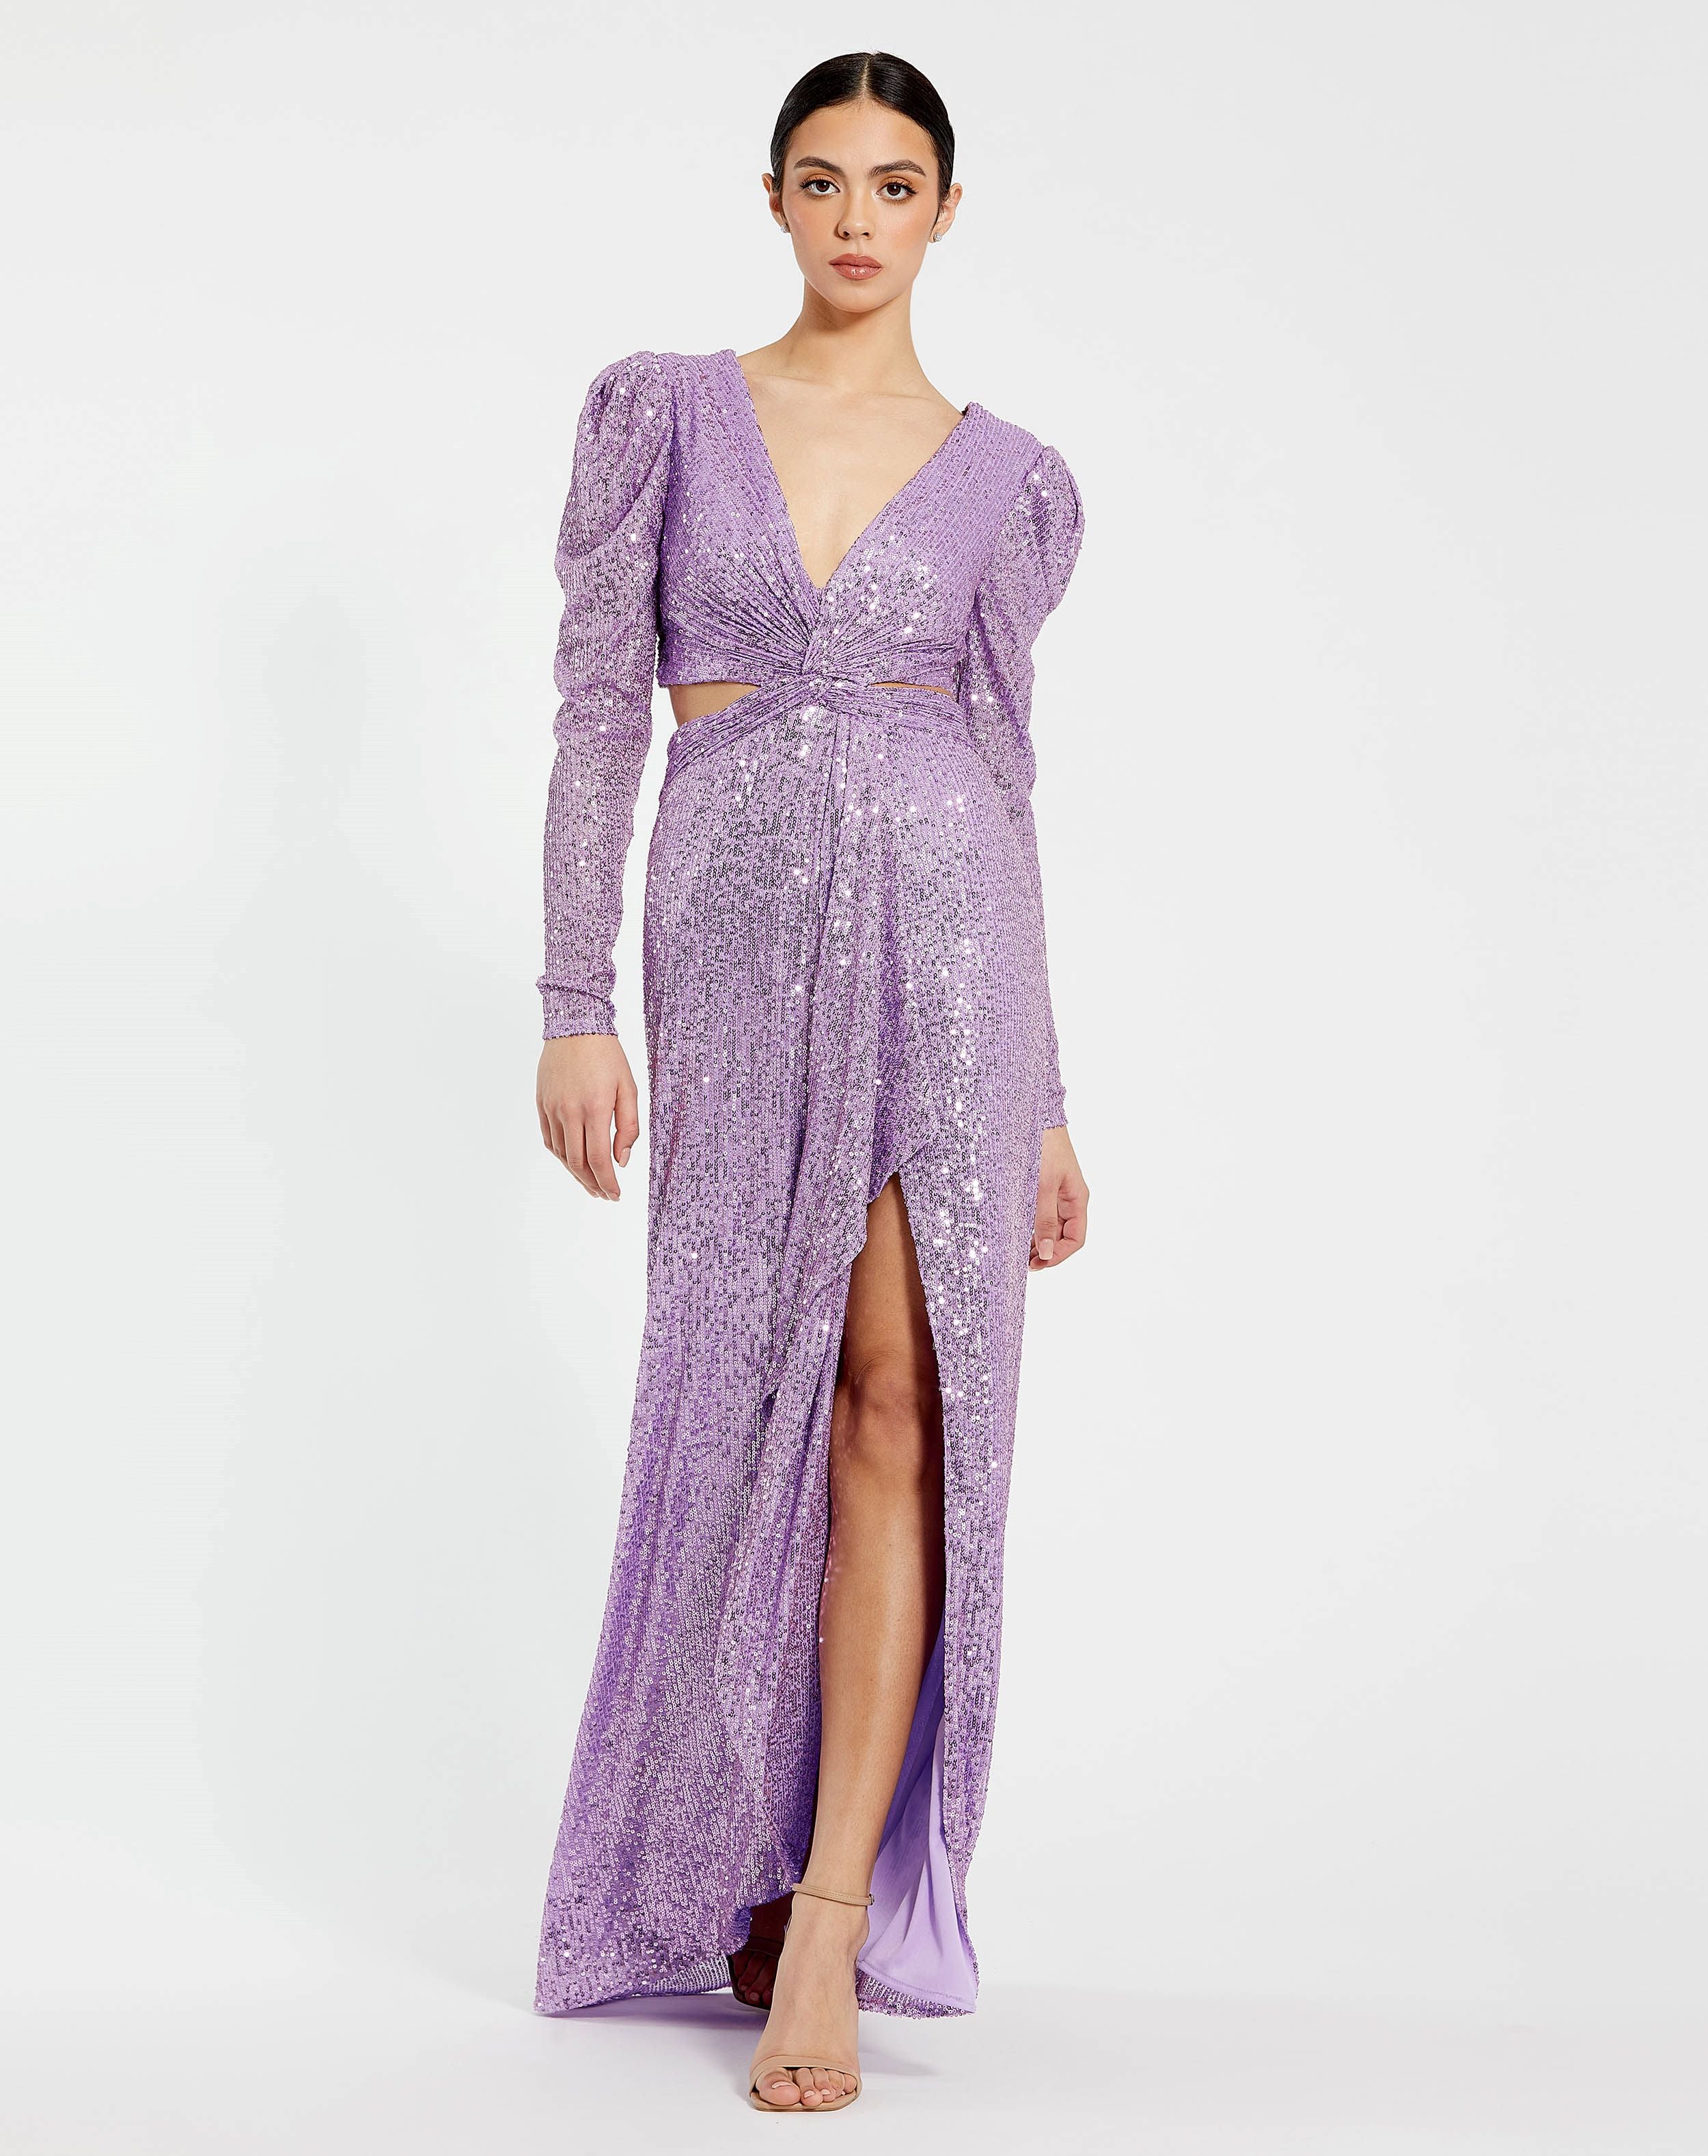 Sequined Criss Cross Long Sleeve Gown | Sample | Sz. 2